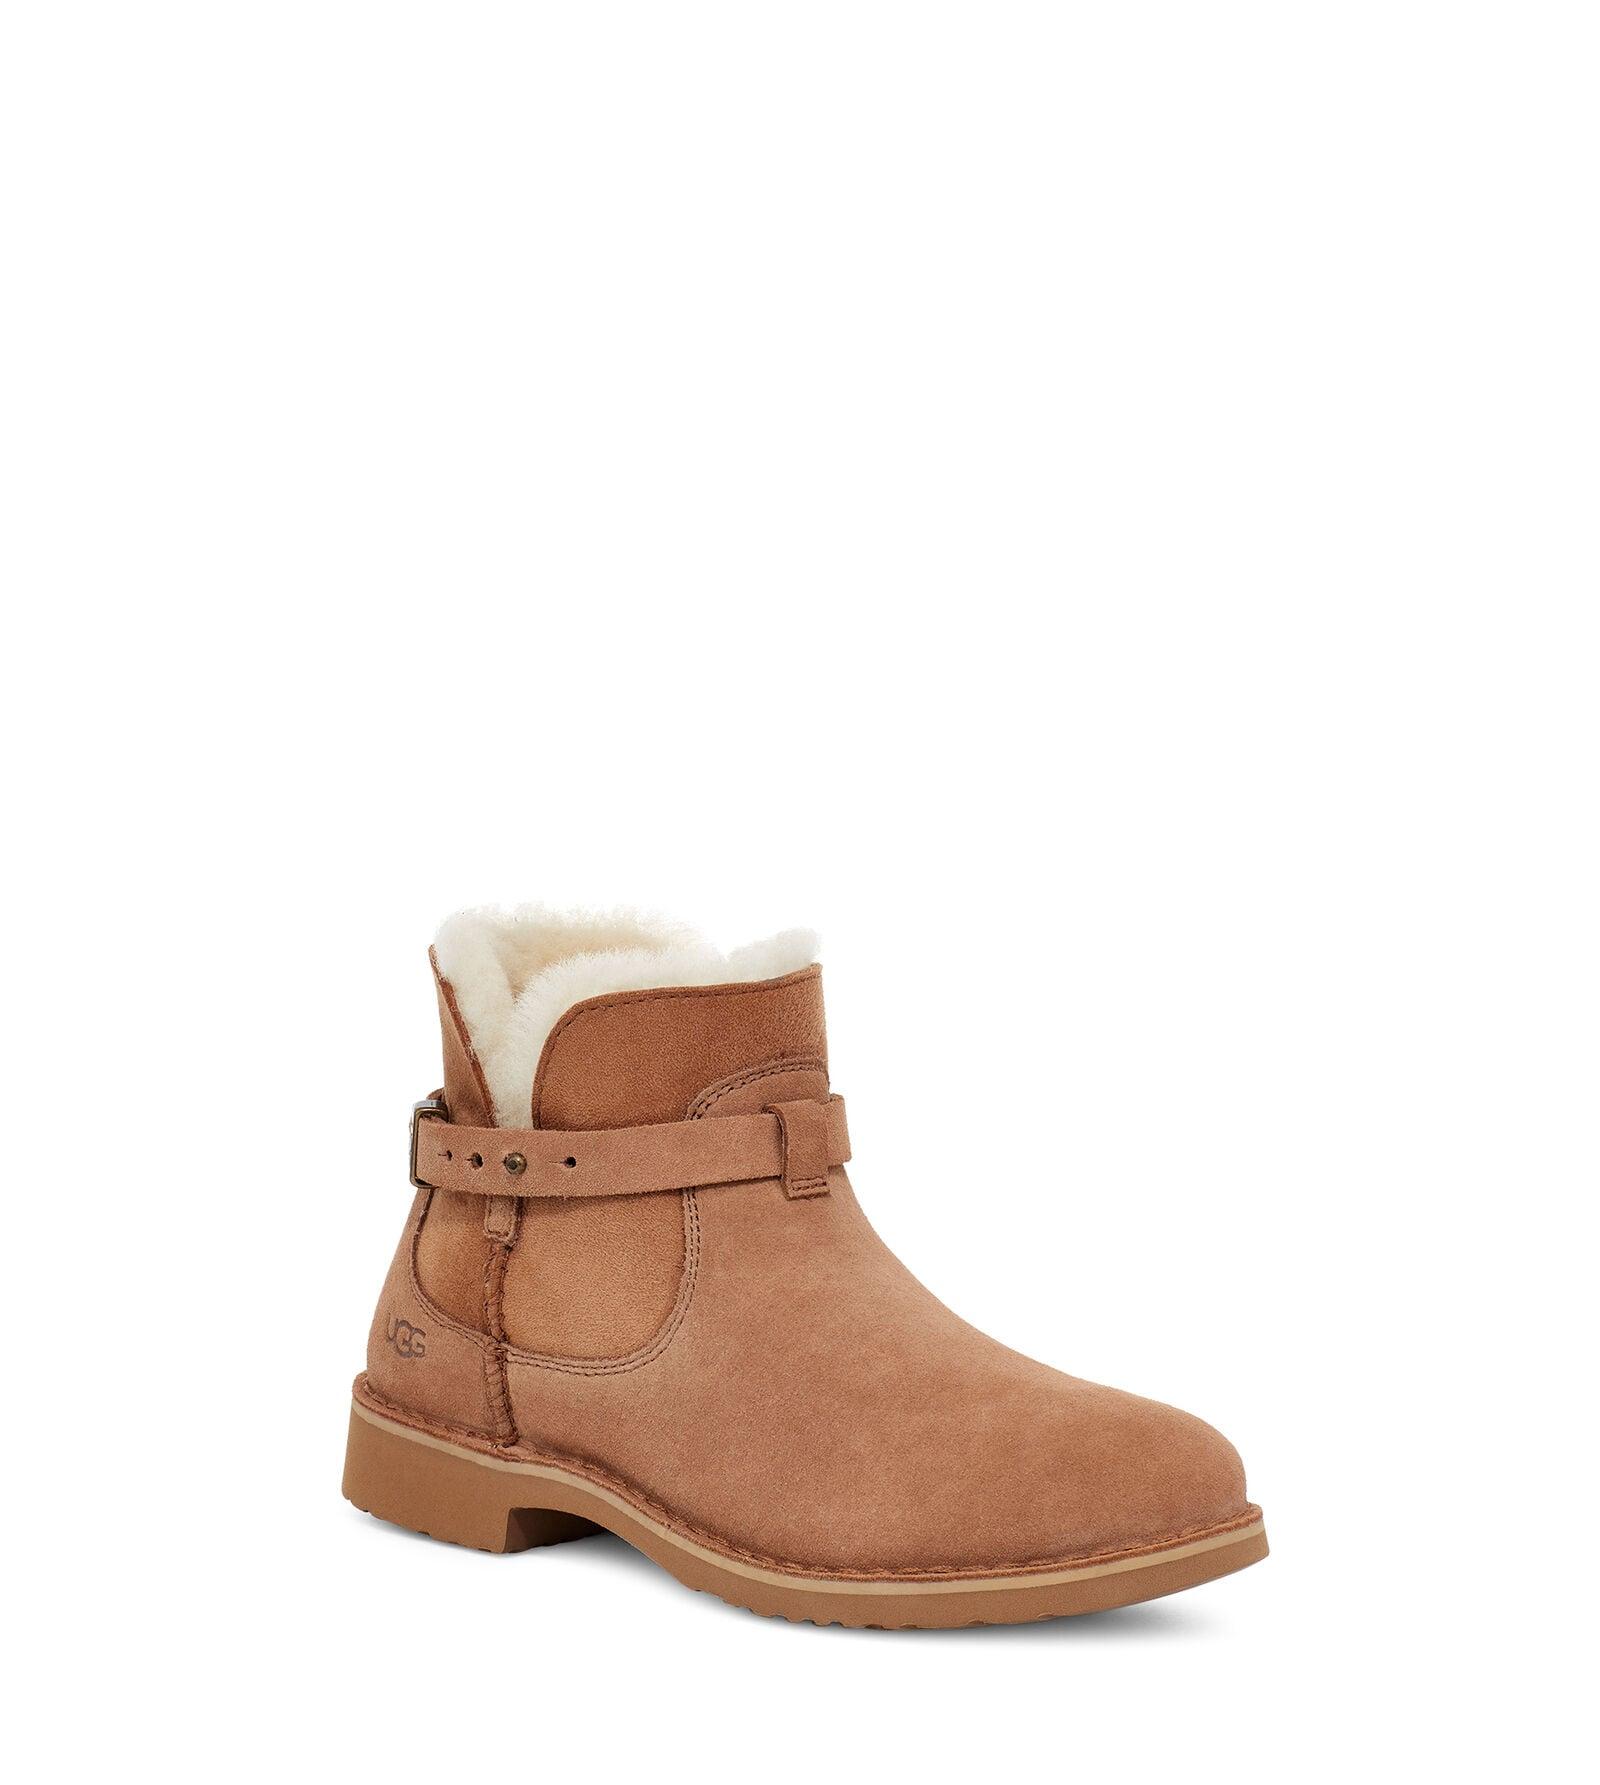 UGG Elisa Suede Ankle Boots in Tan (Brown) | Lyst